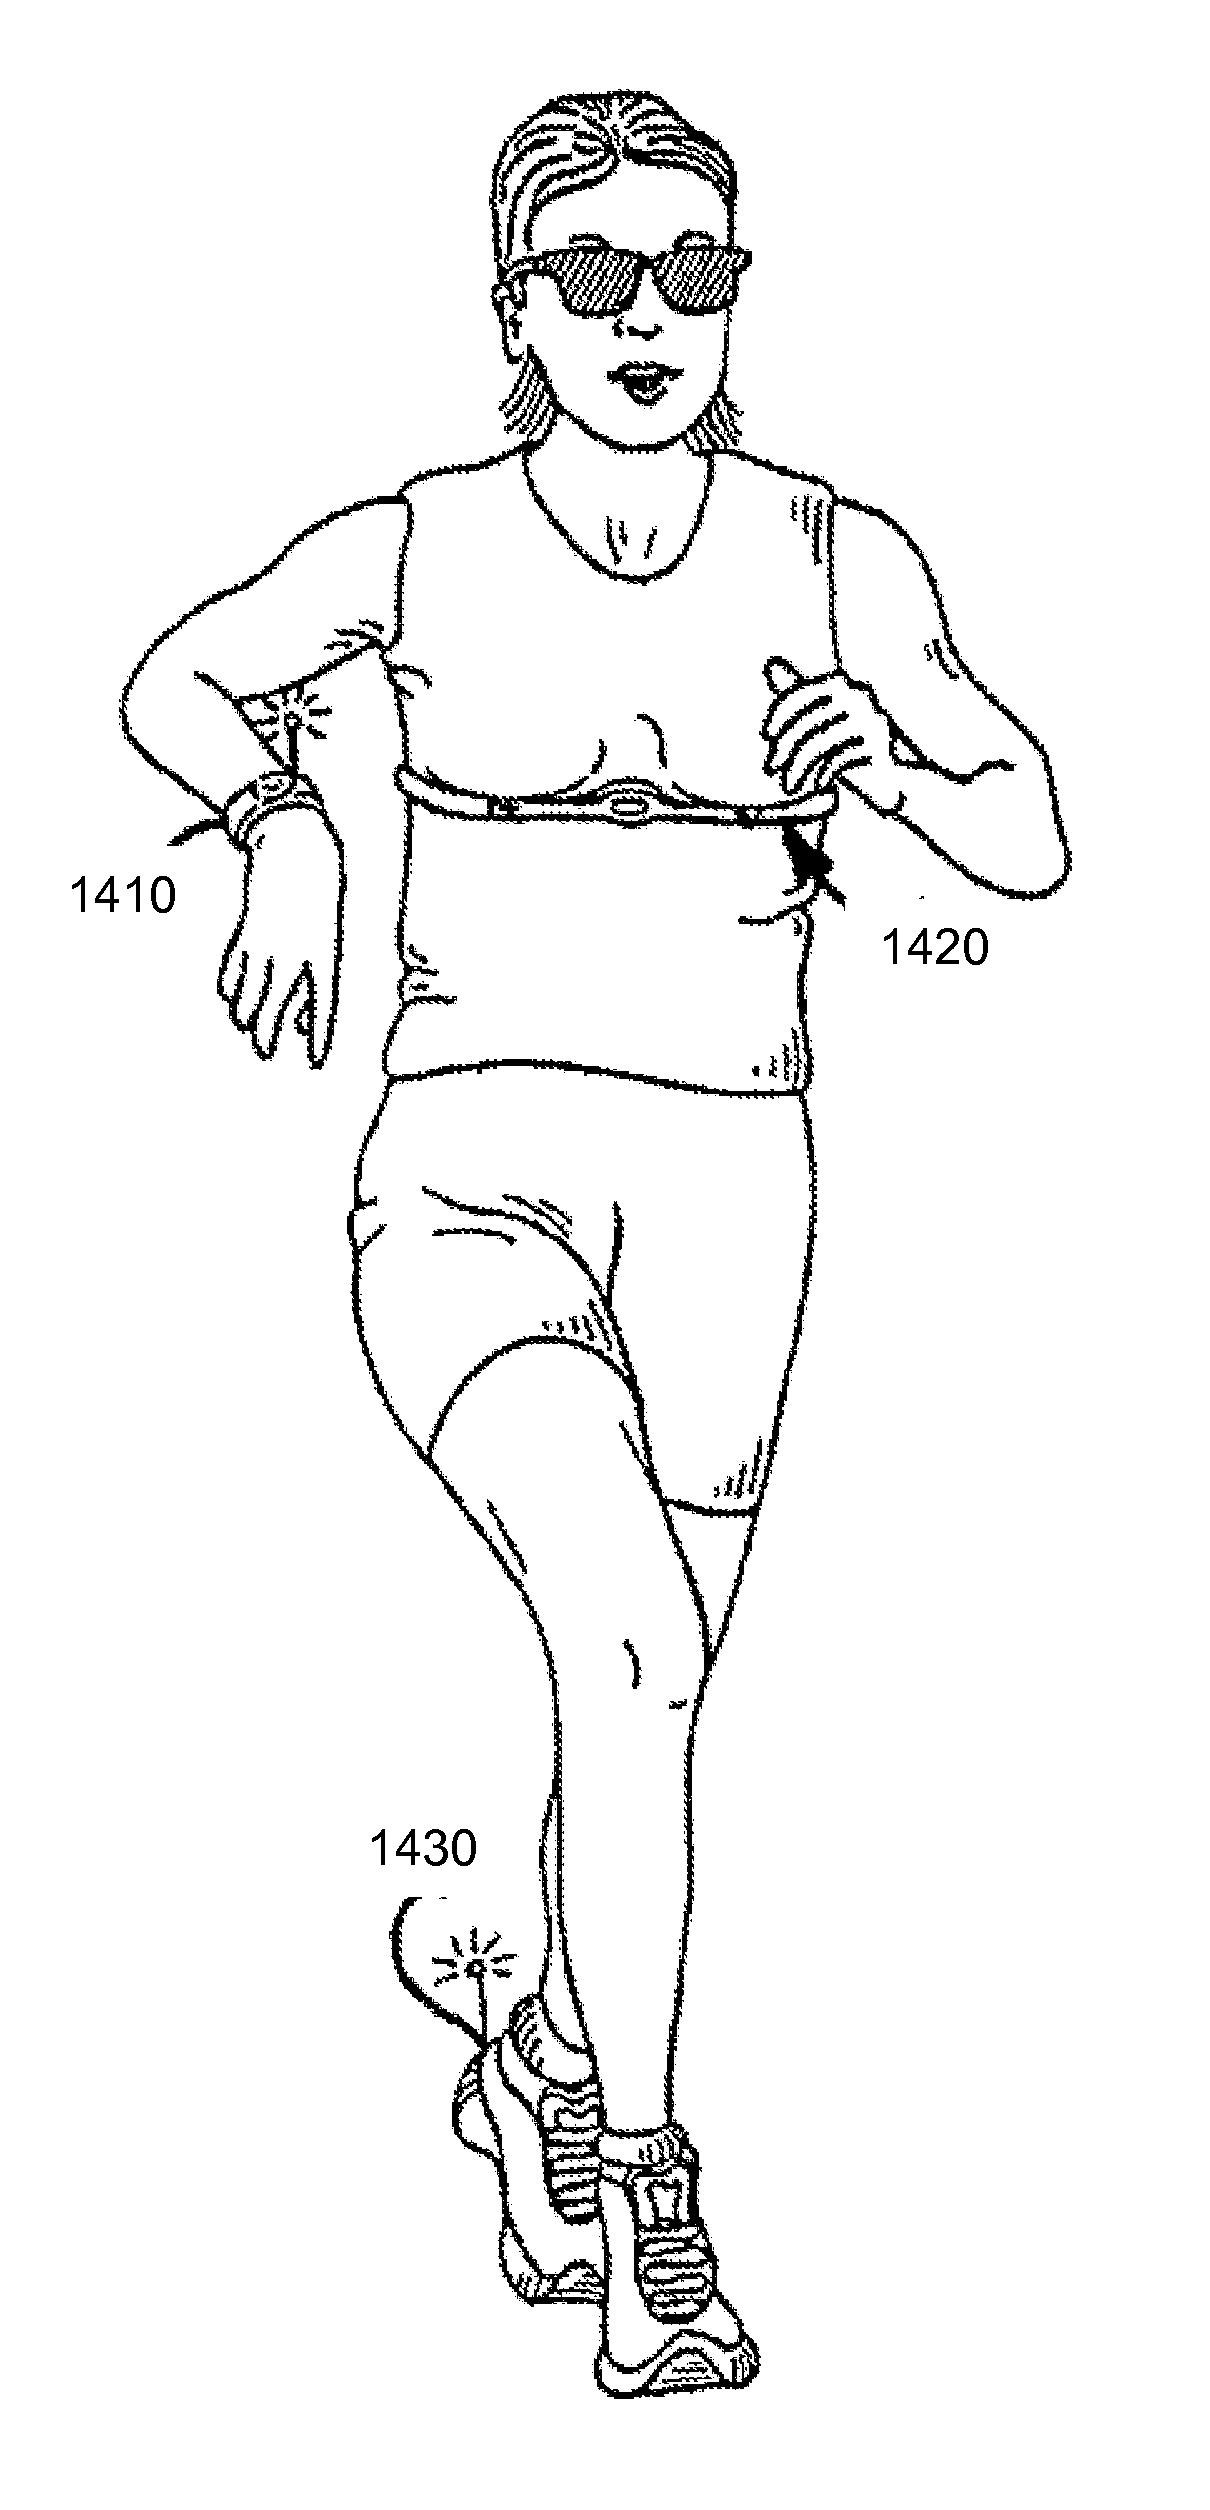 Calibration of a wearable medical device